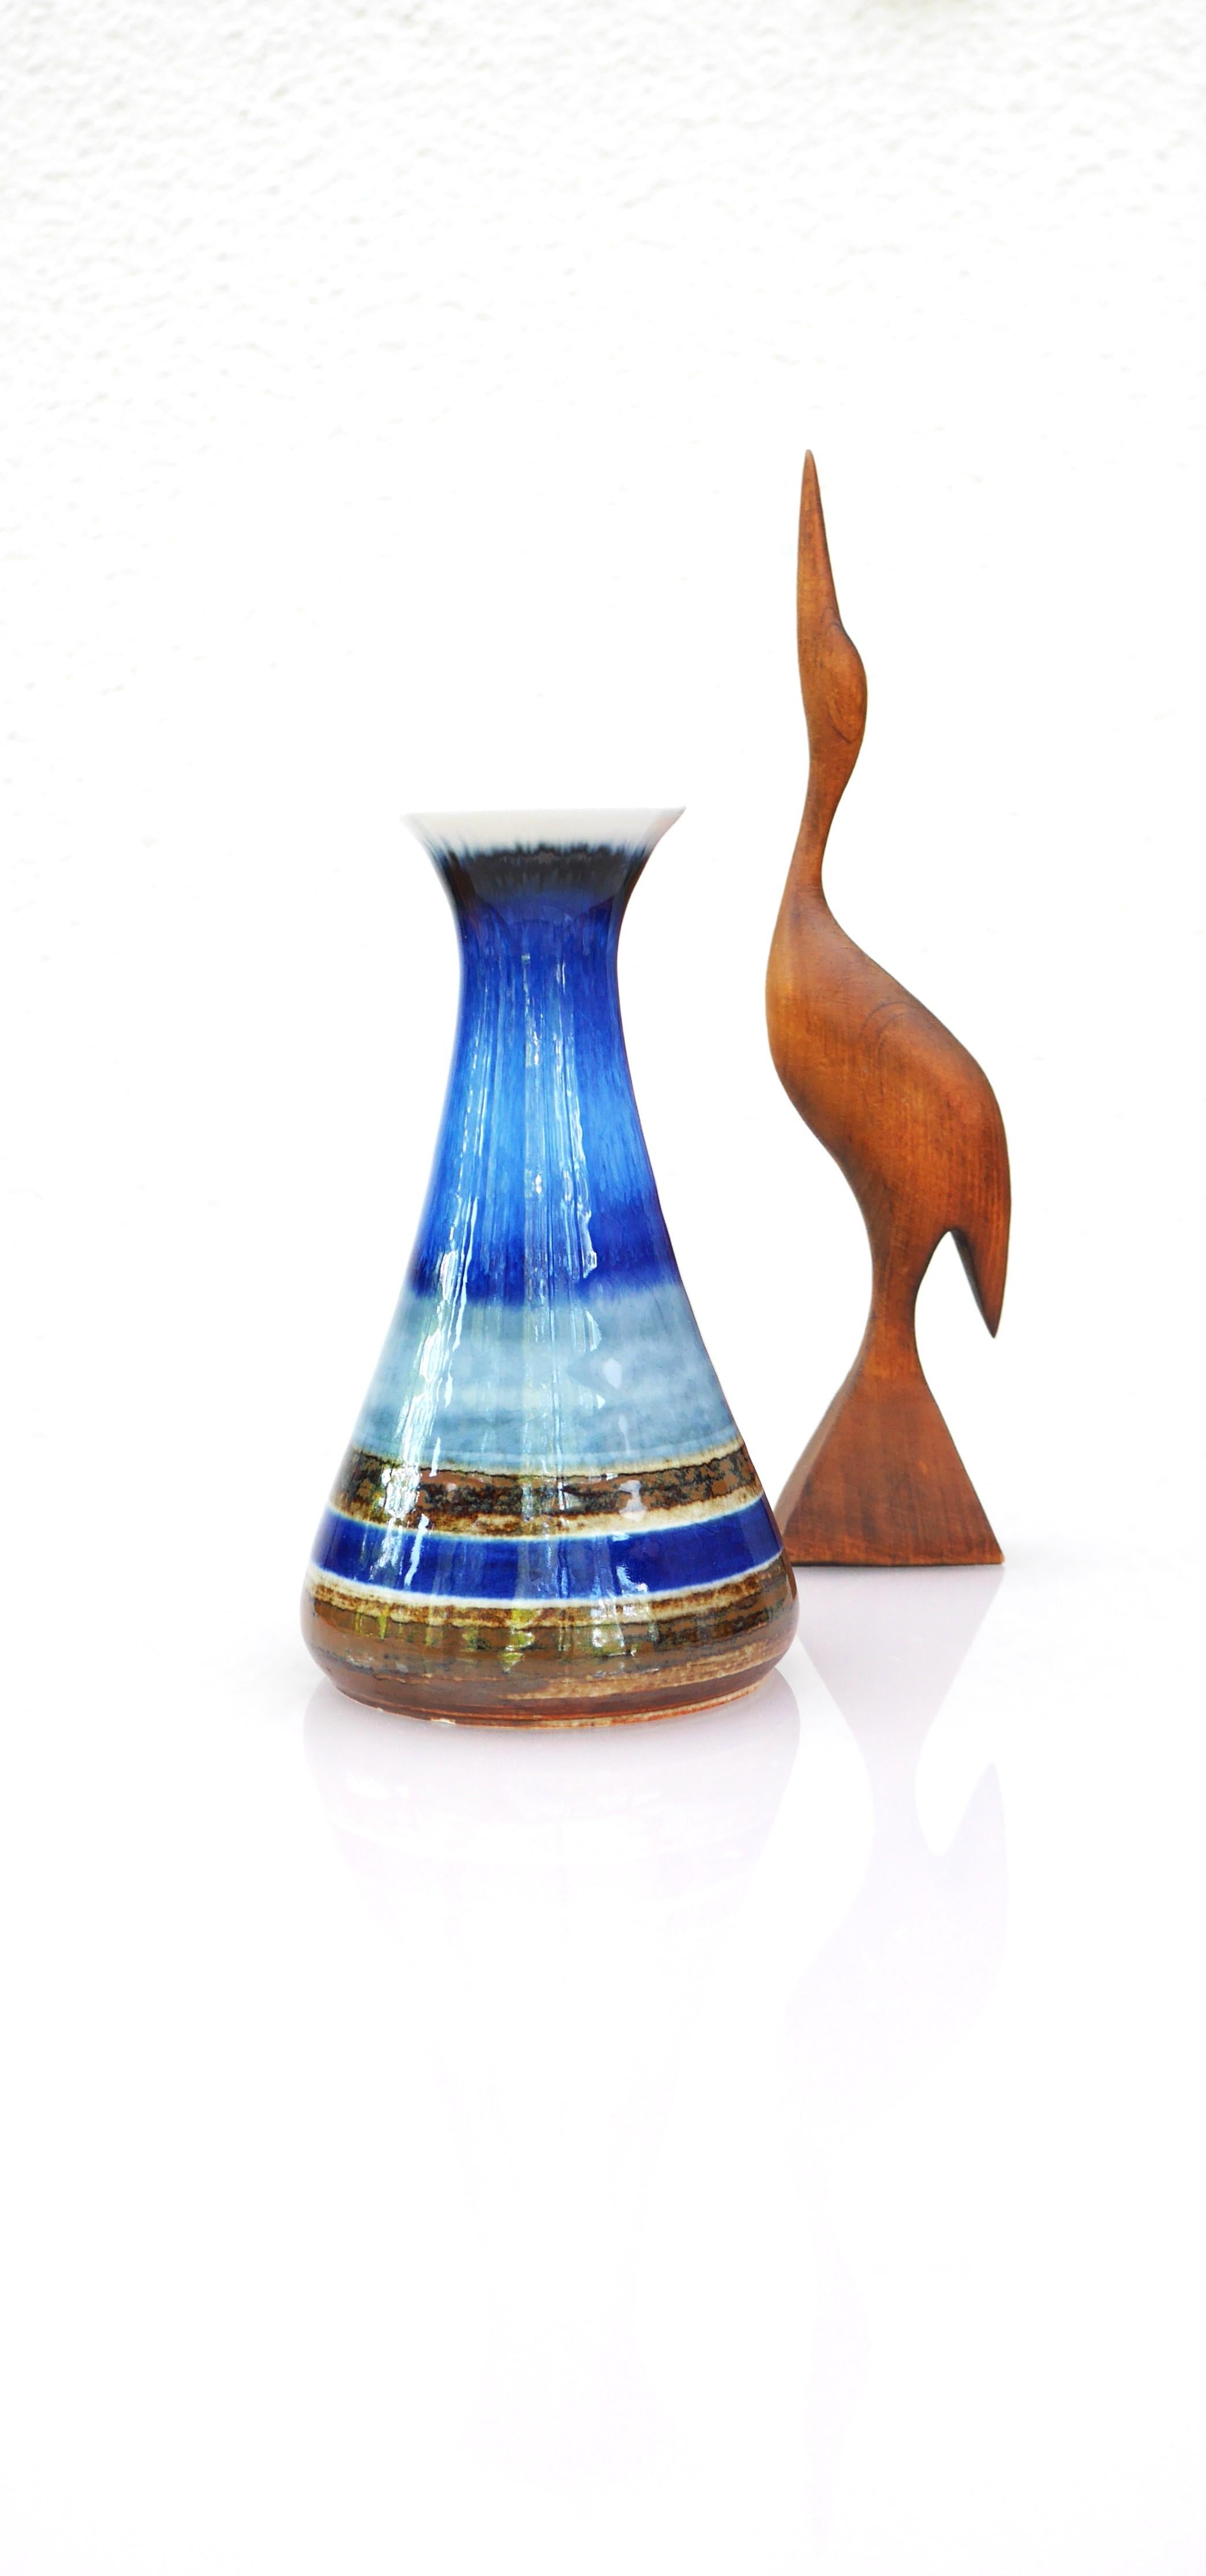 Mid-20th Century Mid-century modern pottery vase by G. Millberg for Rörstrand, Sweden. For Sale